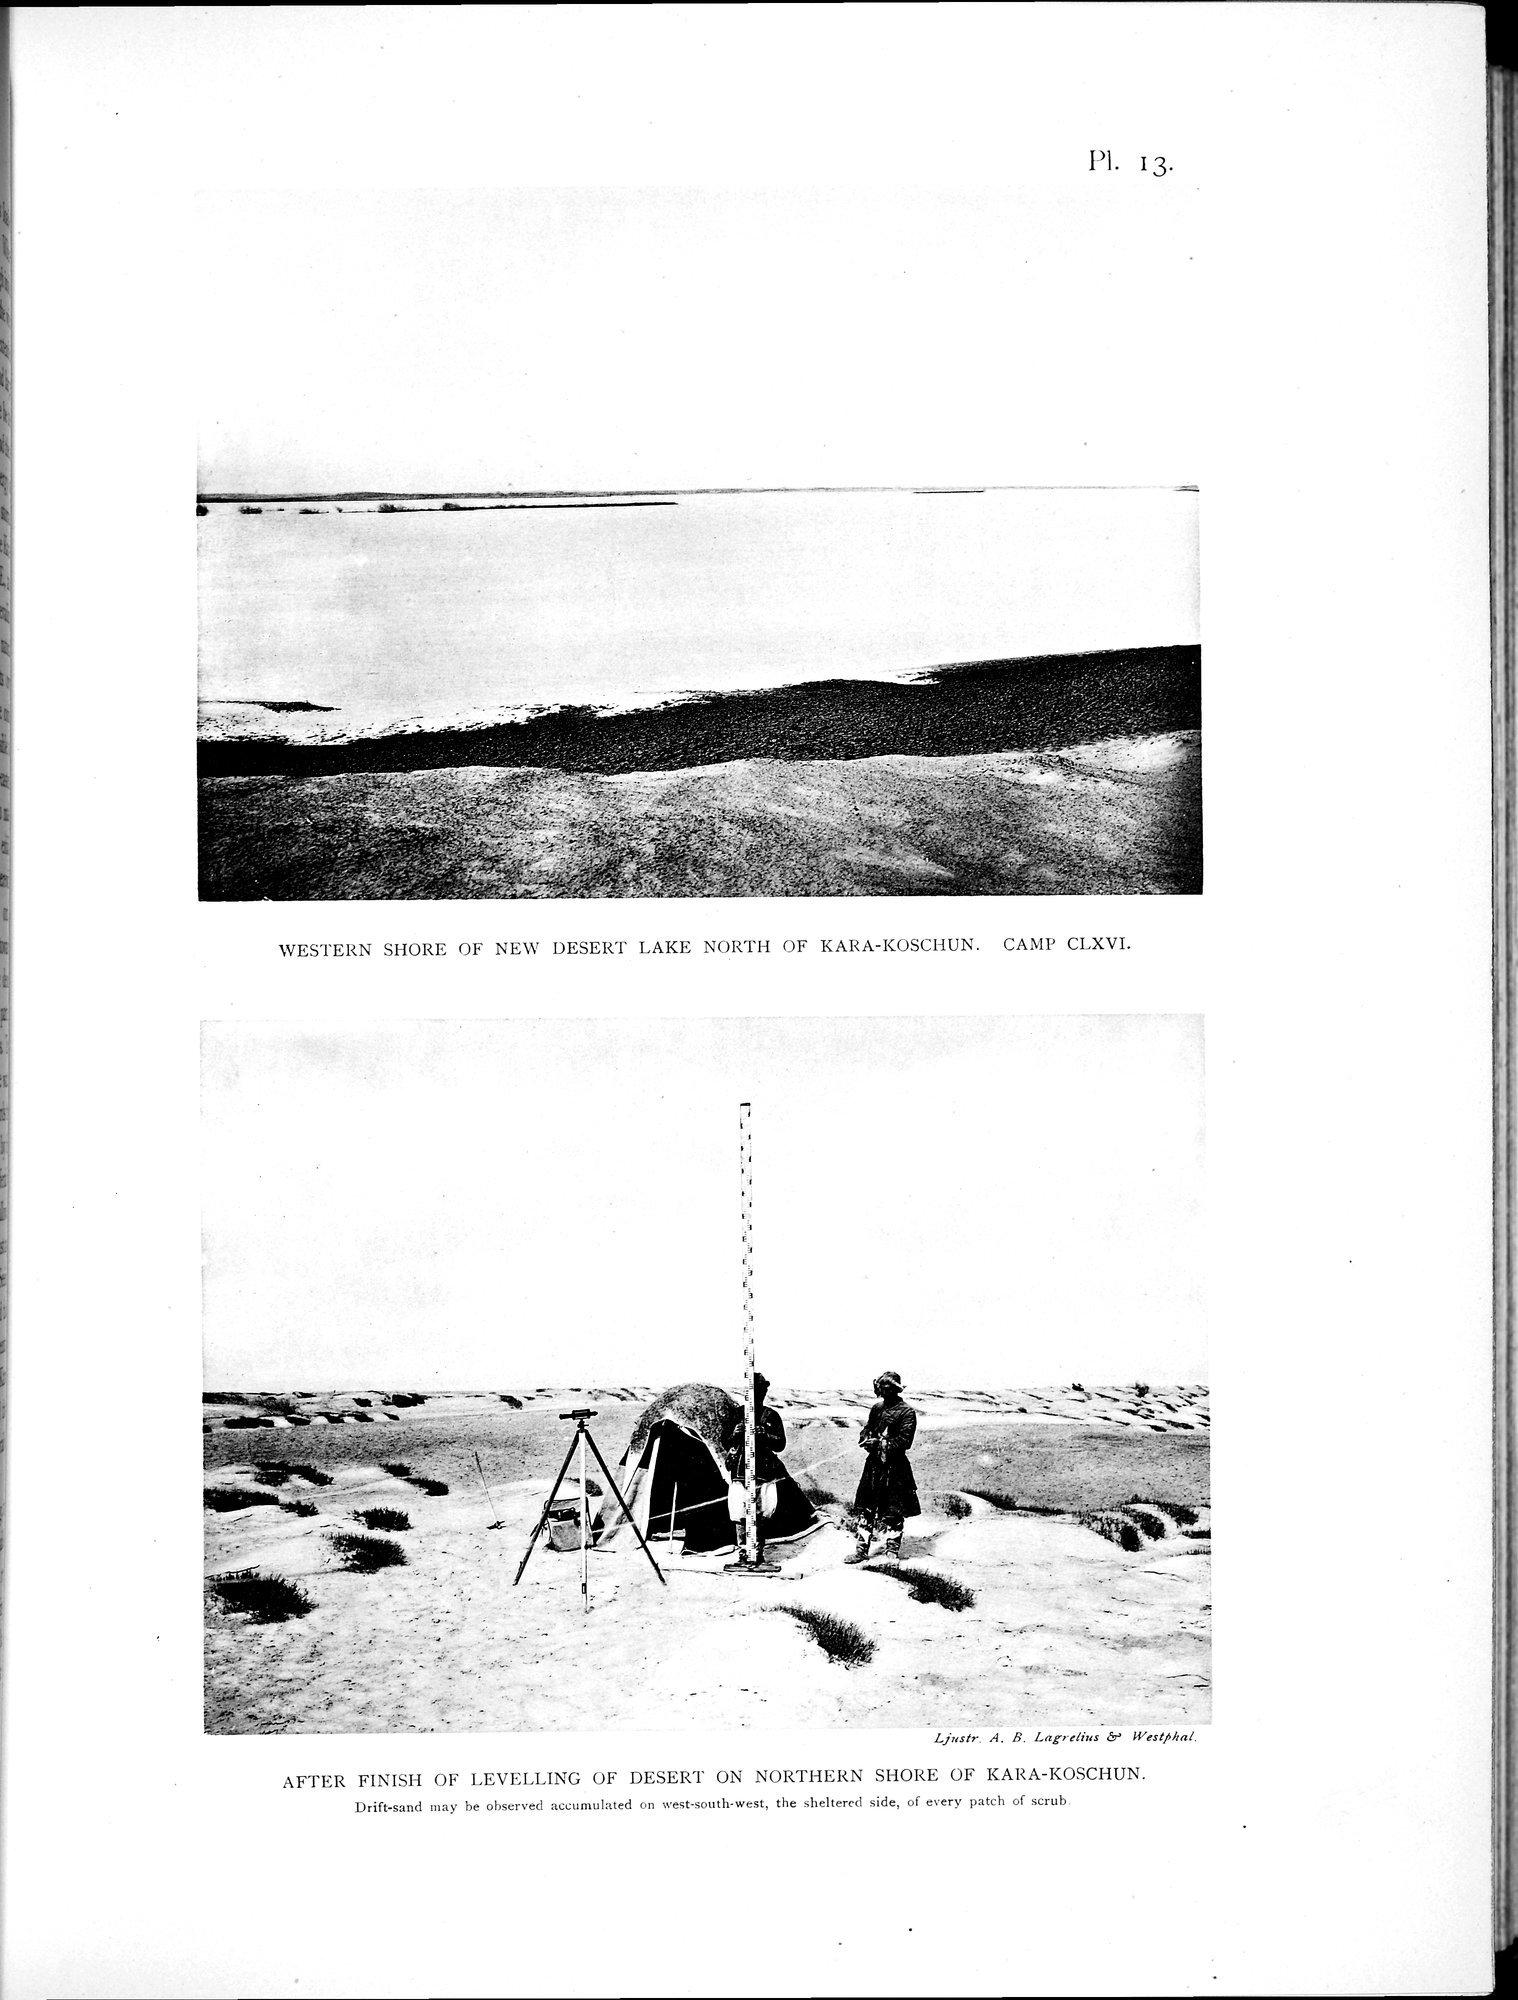 Scientific Results of a Journey in Central Asia, 1899-1902 : vol.2 / 209 ページ（白黒高解像度画像）